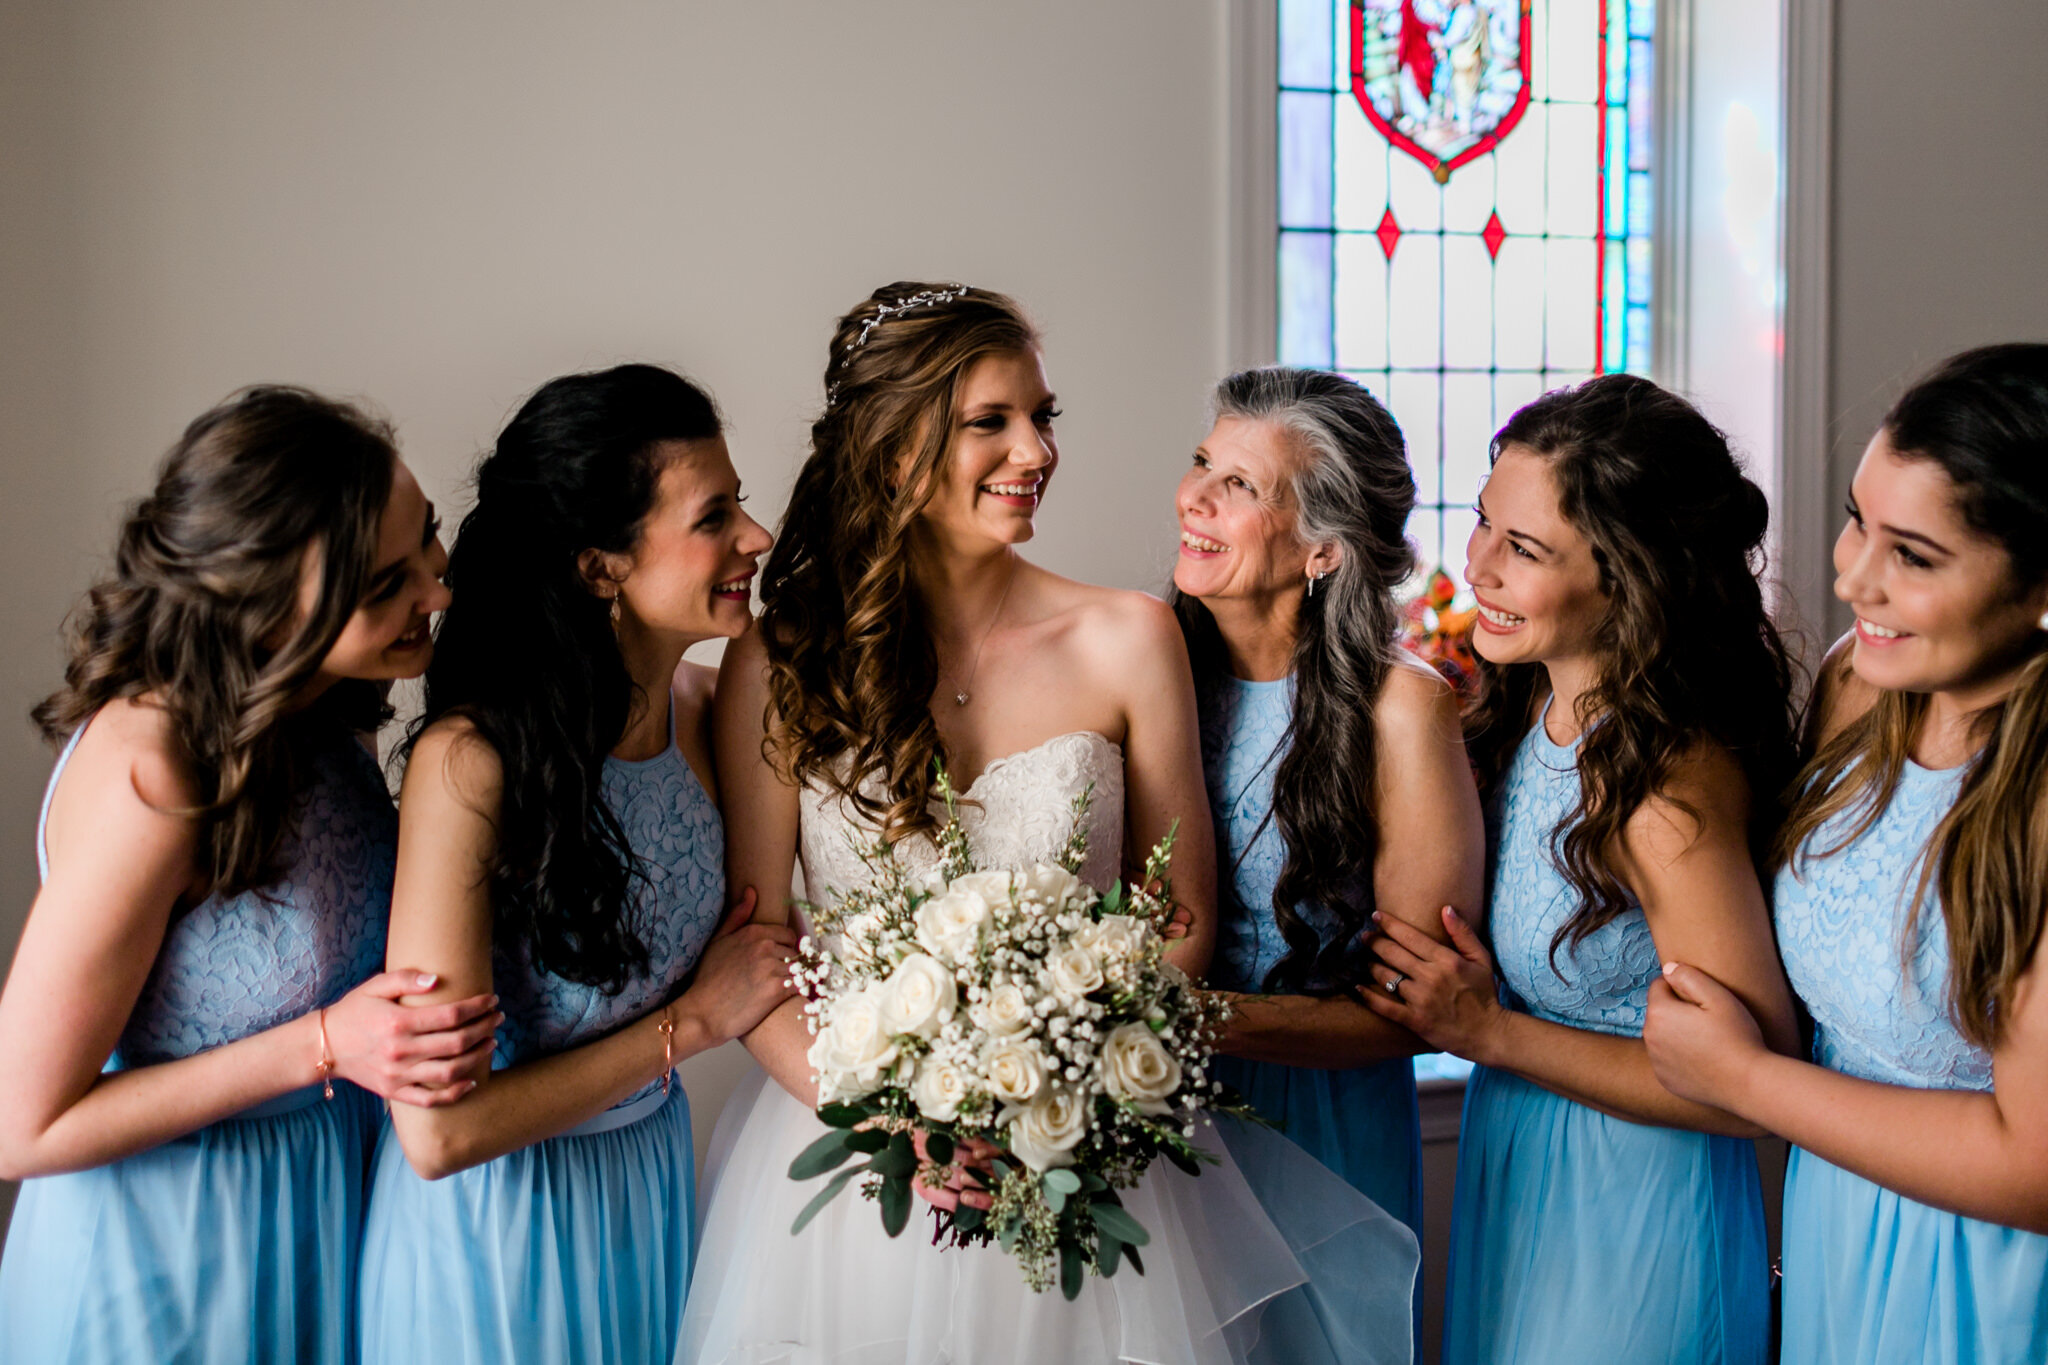 Durham Wedding Photographer | By G. Lin Photography | Bridal party smiling and laughing together